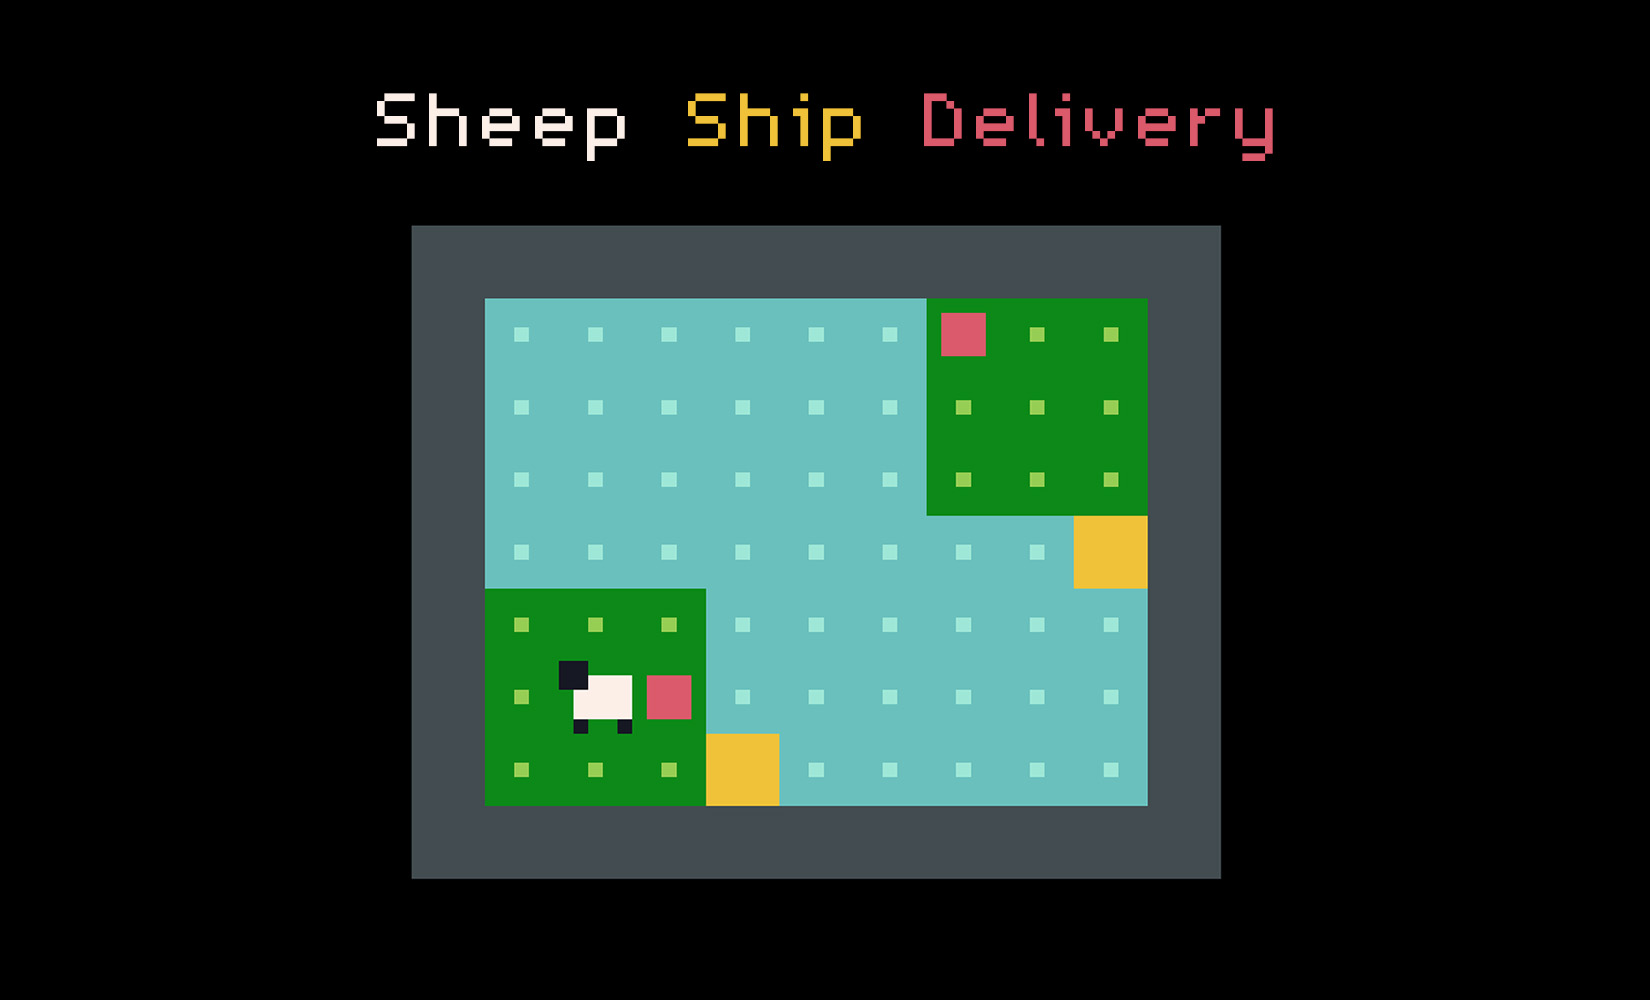 Sheep Ship Delivery